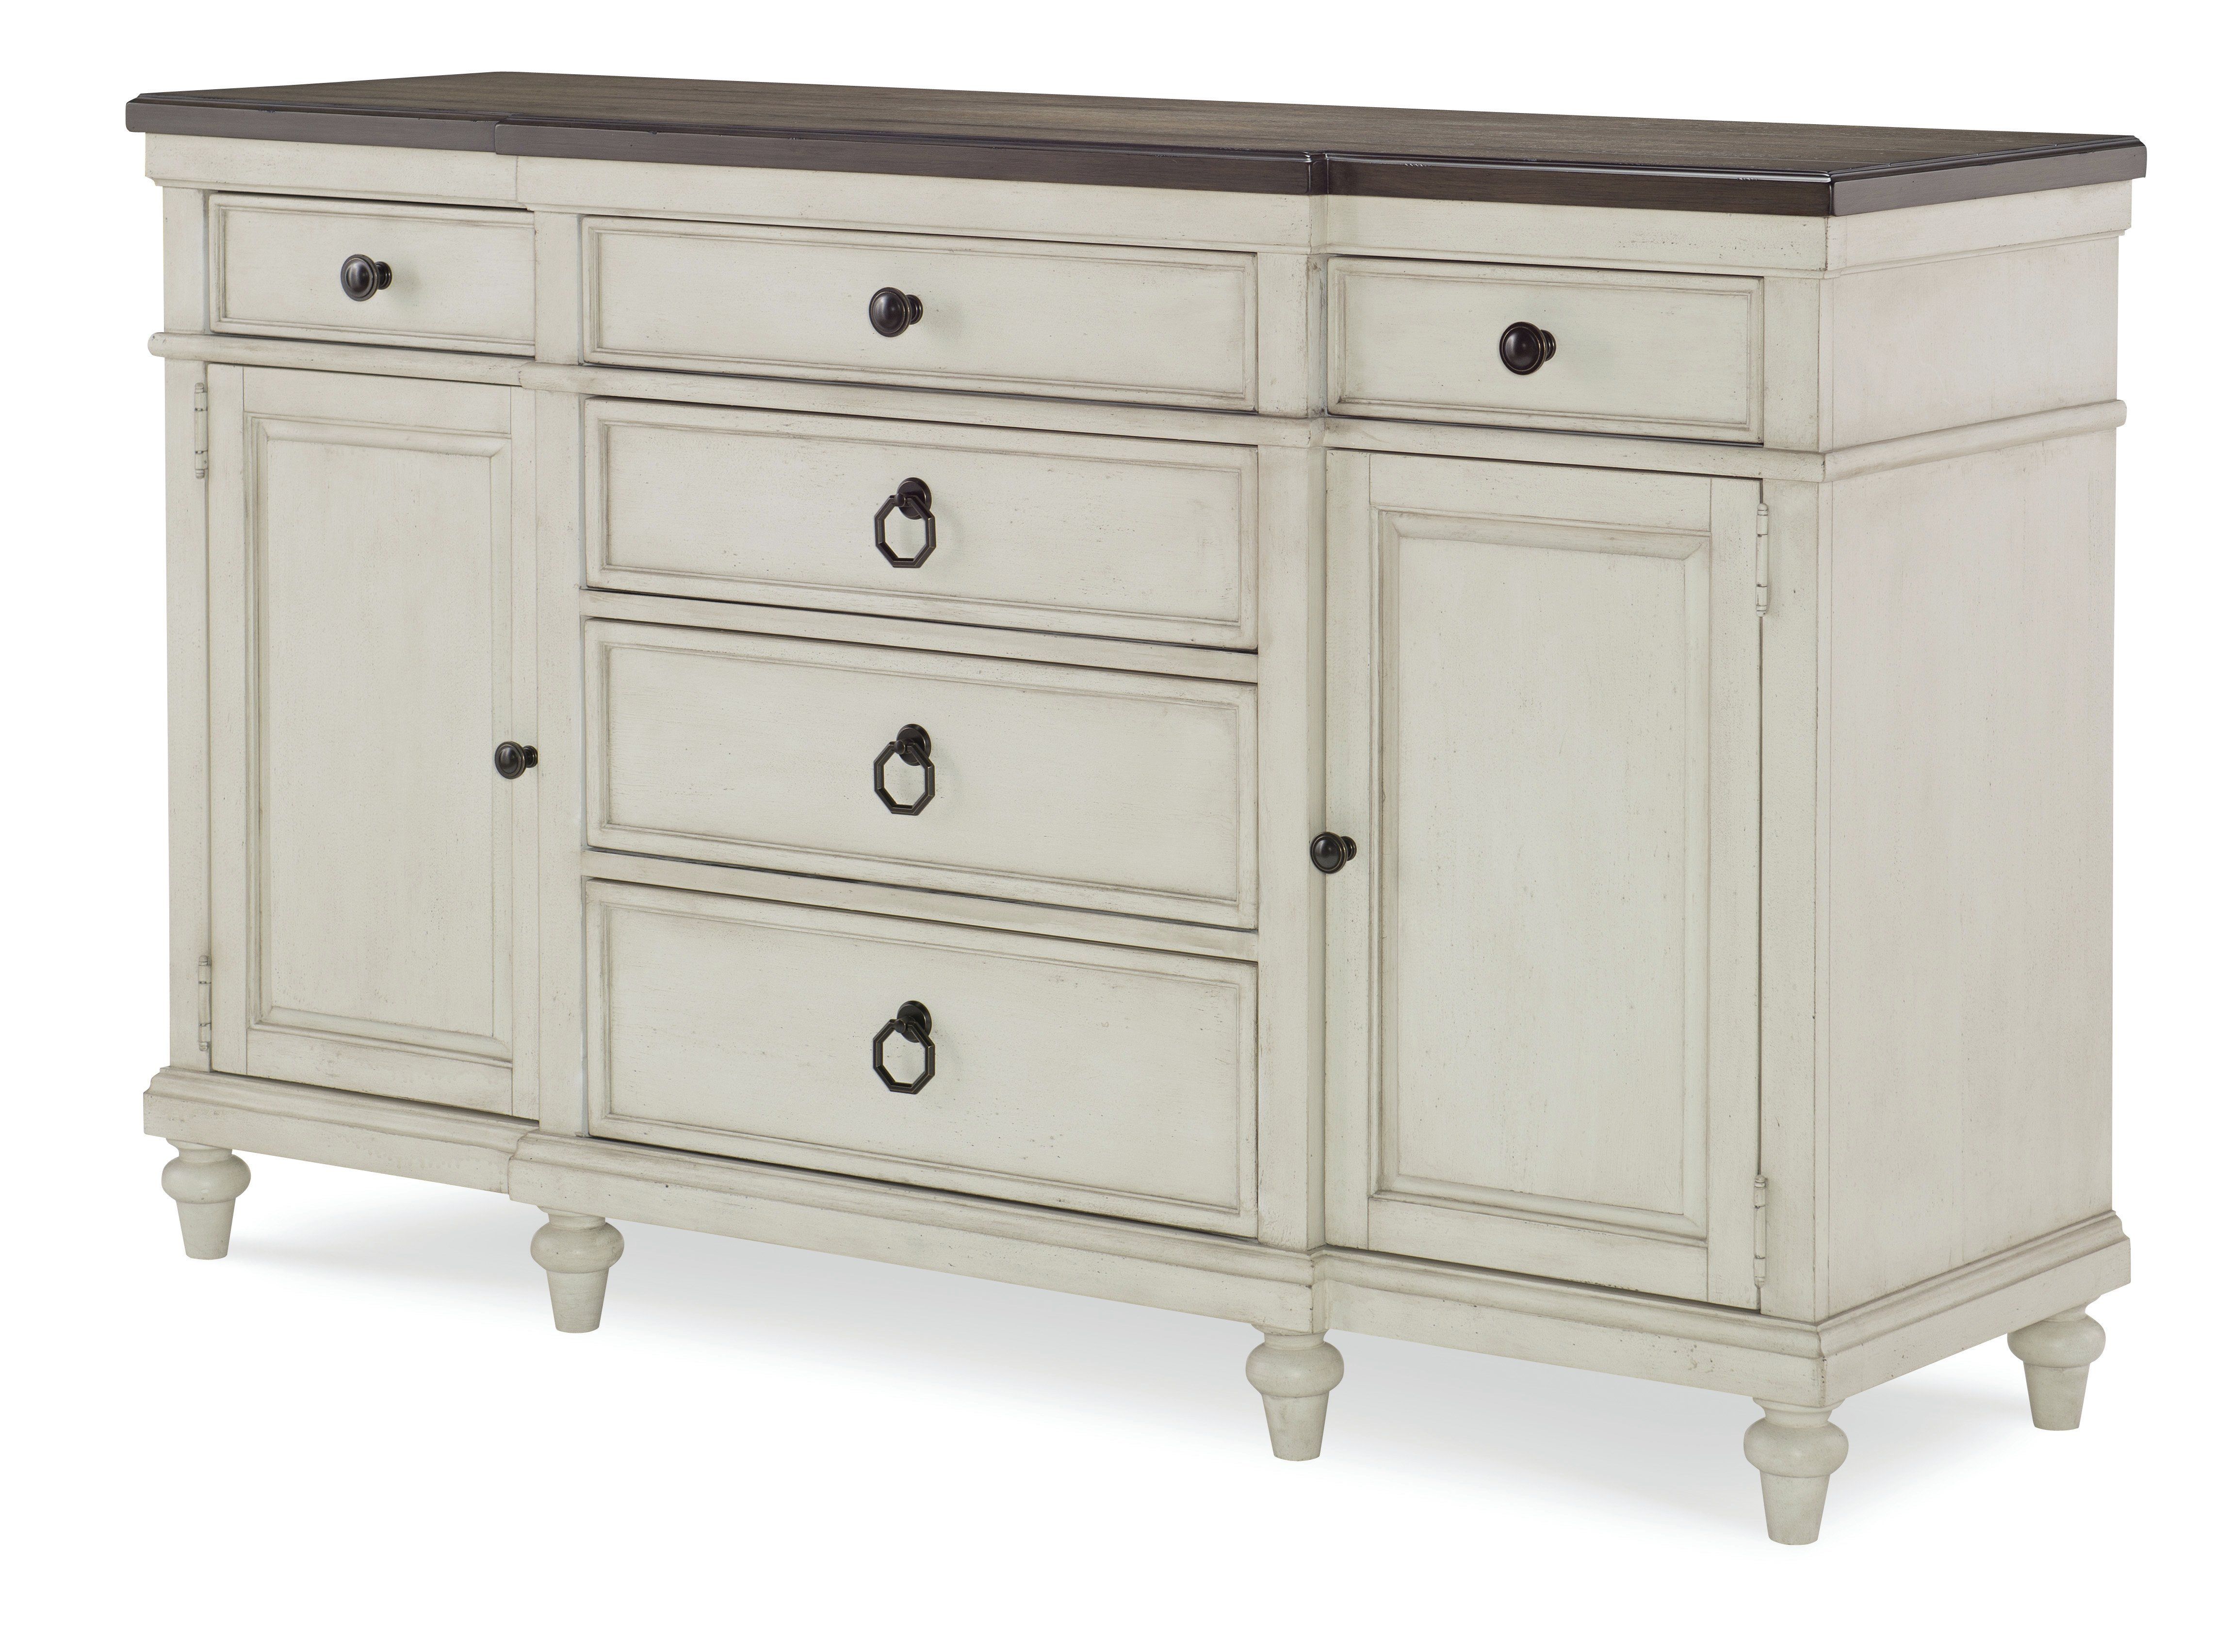 Silverware Storage Equipped Sideboards & Buffets | Joss & Main With Regard To Payton Serving Sideboards (Photo 6 of 30)